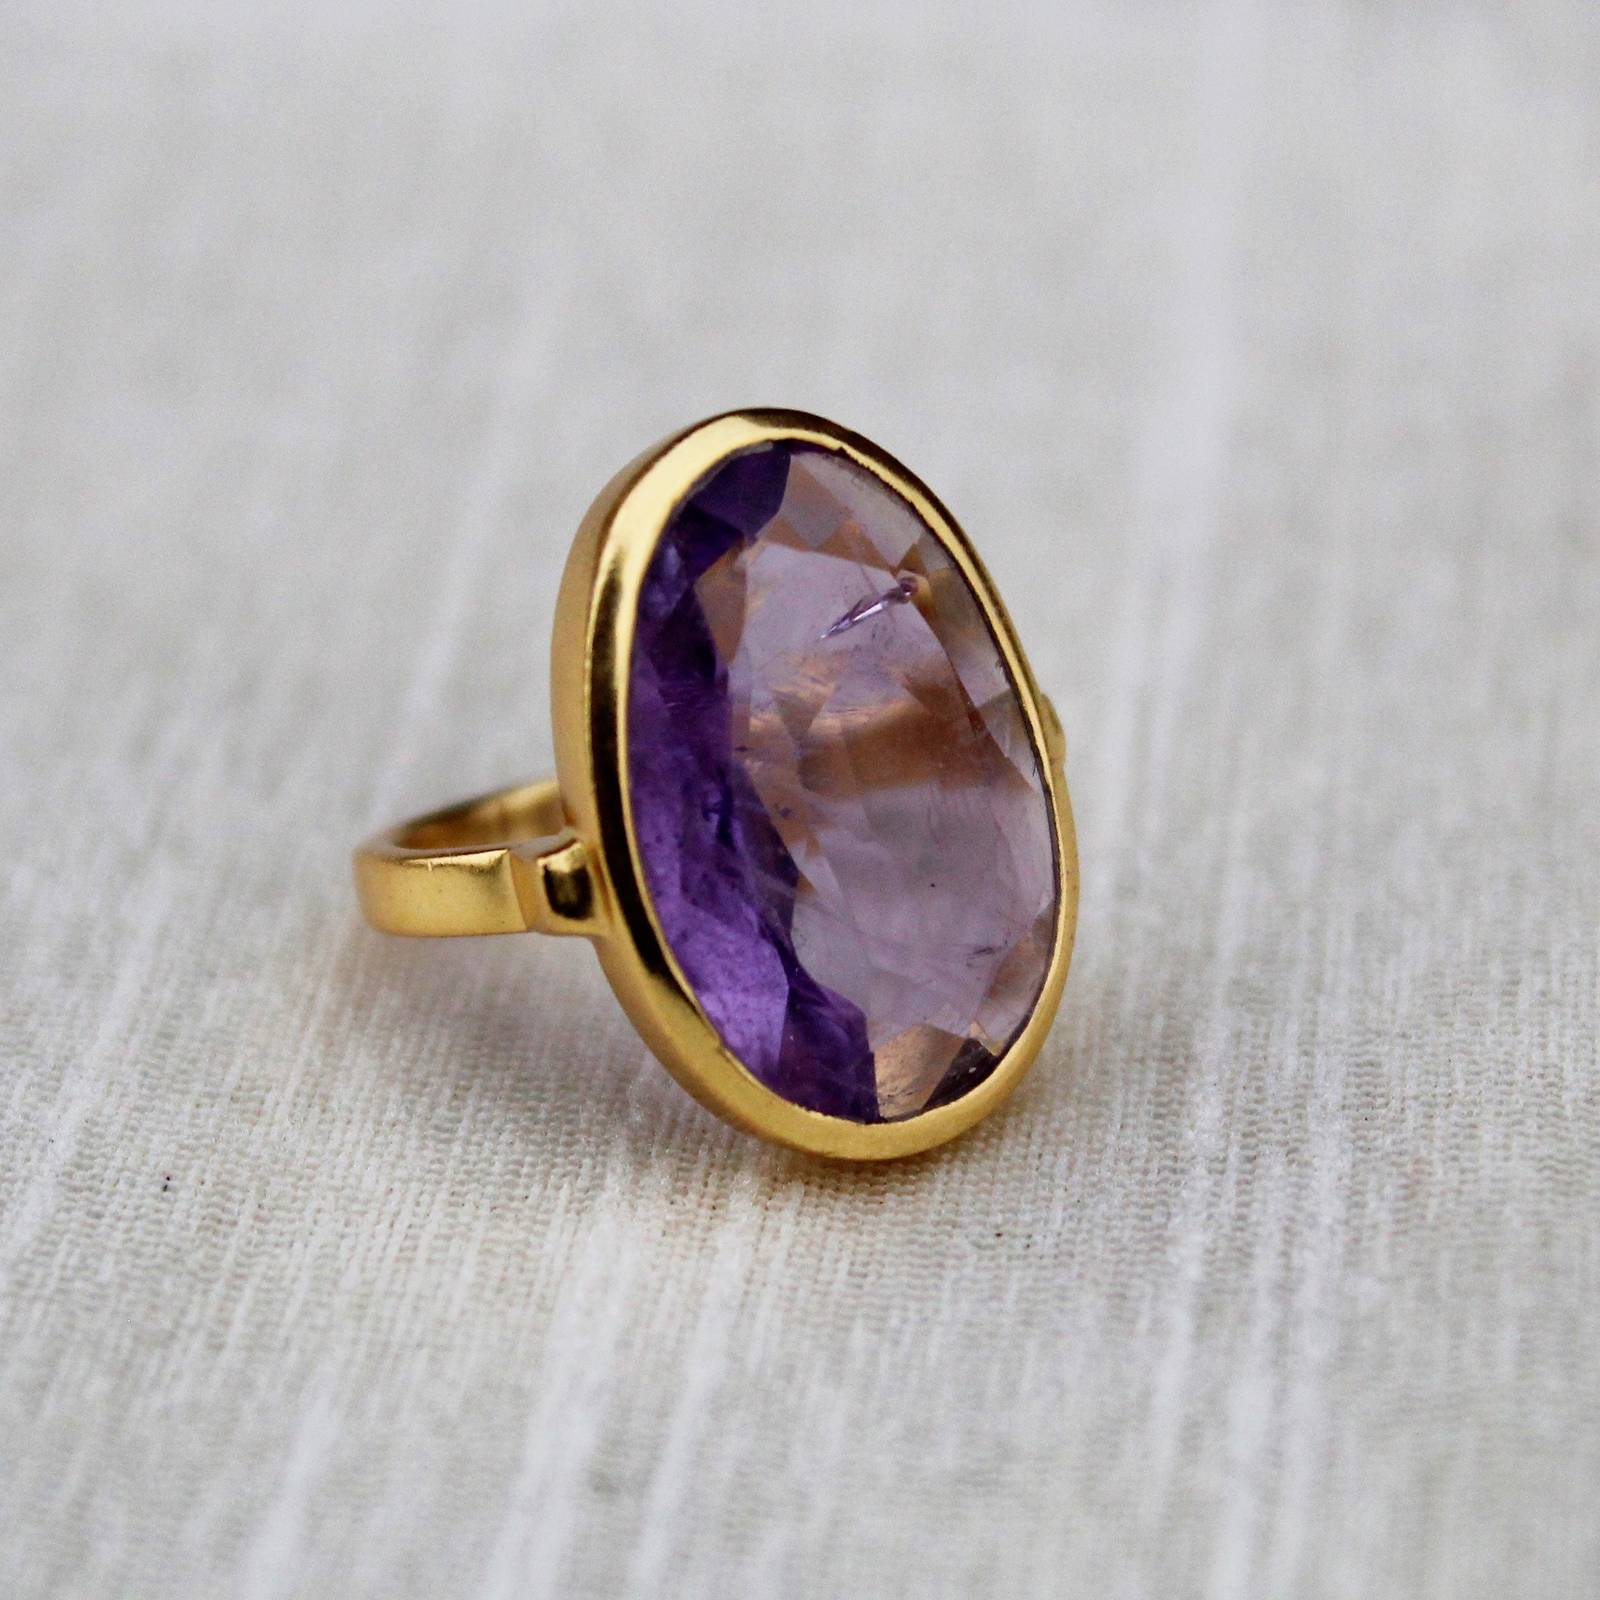 Primary image for Natural Amethyst Ring, Sterling Silver Ring, Gold Plated Ring, Purple Amethyst R